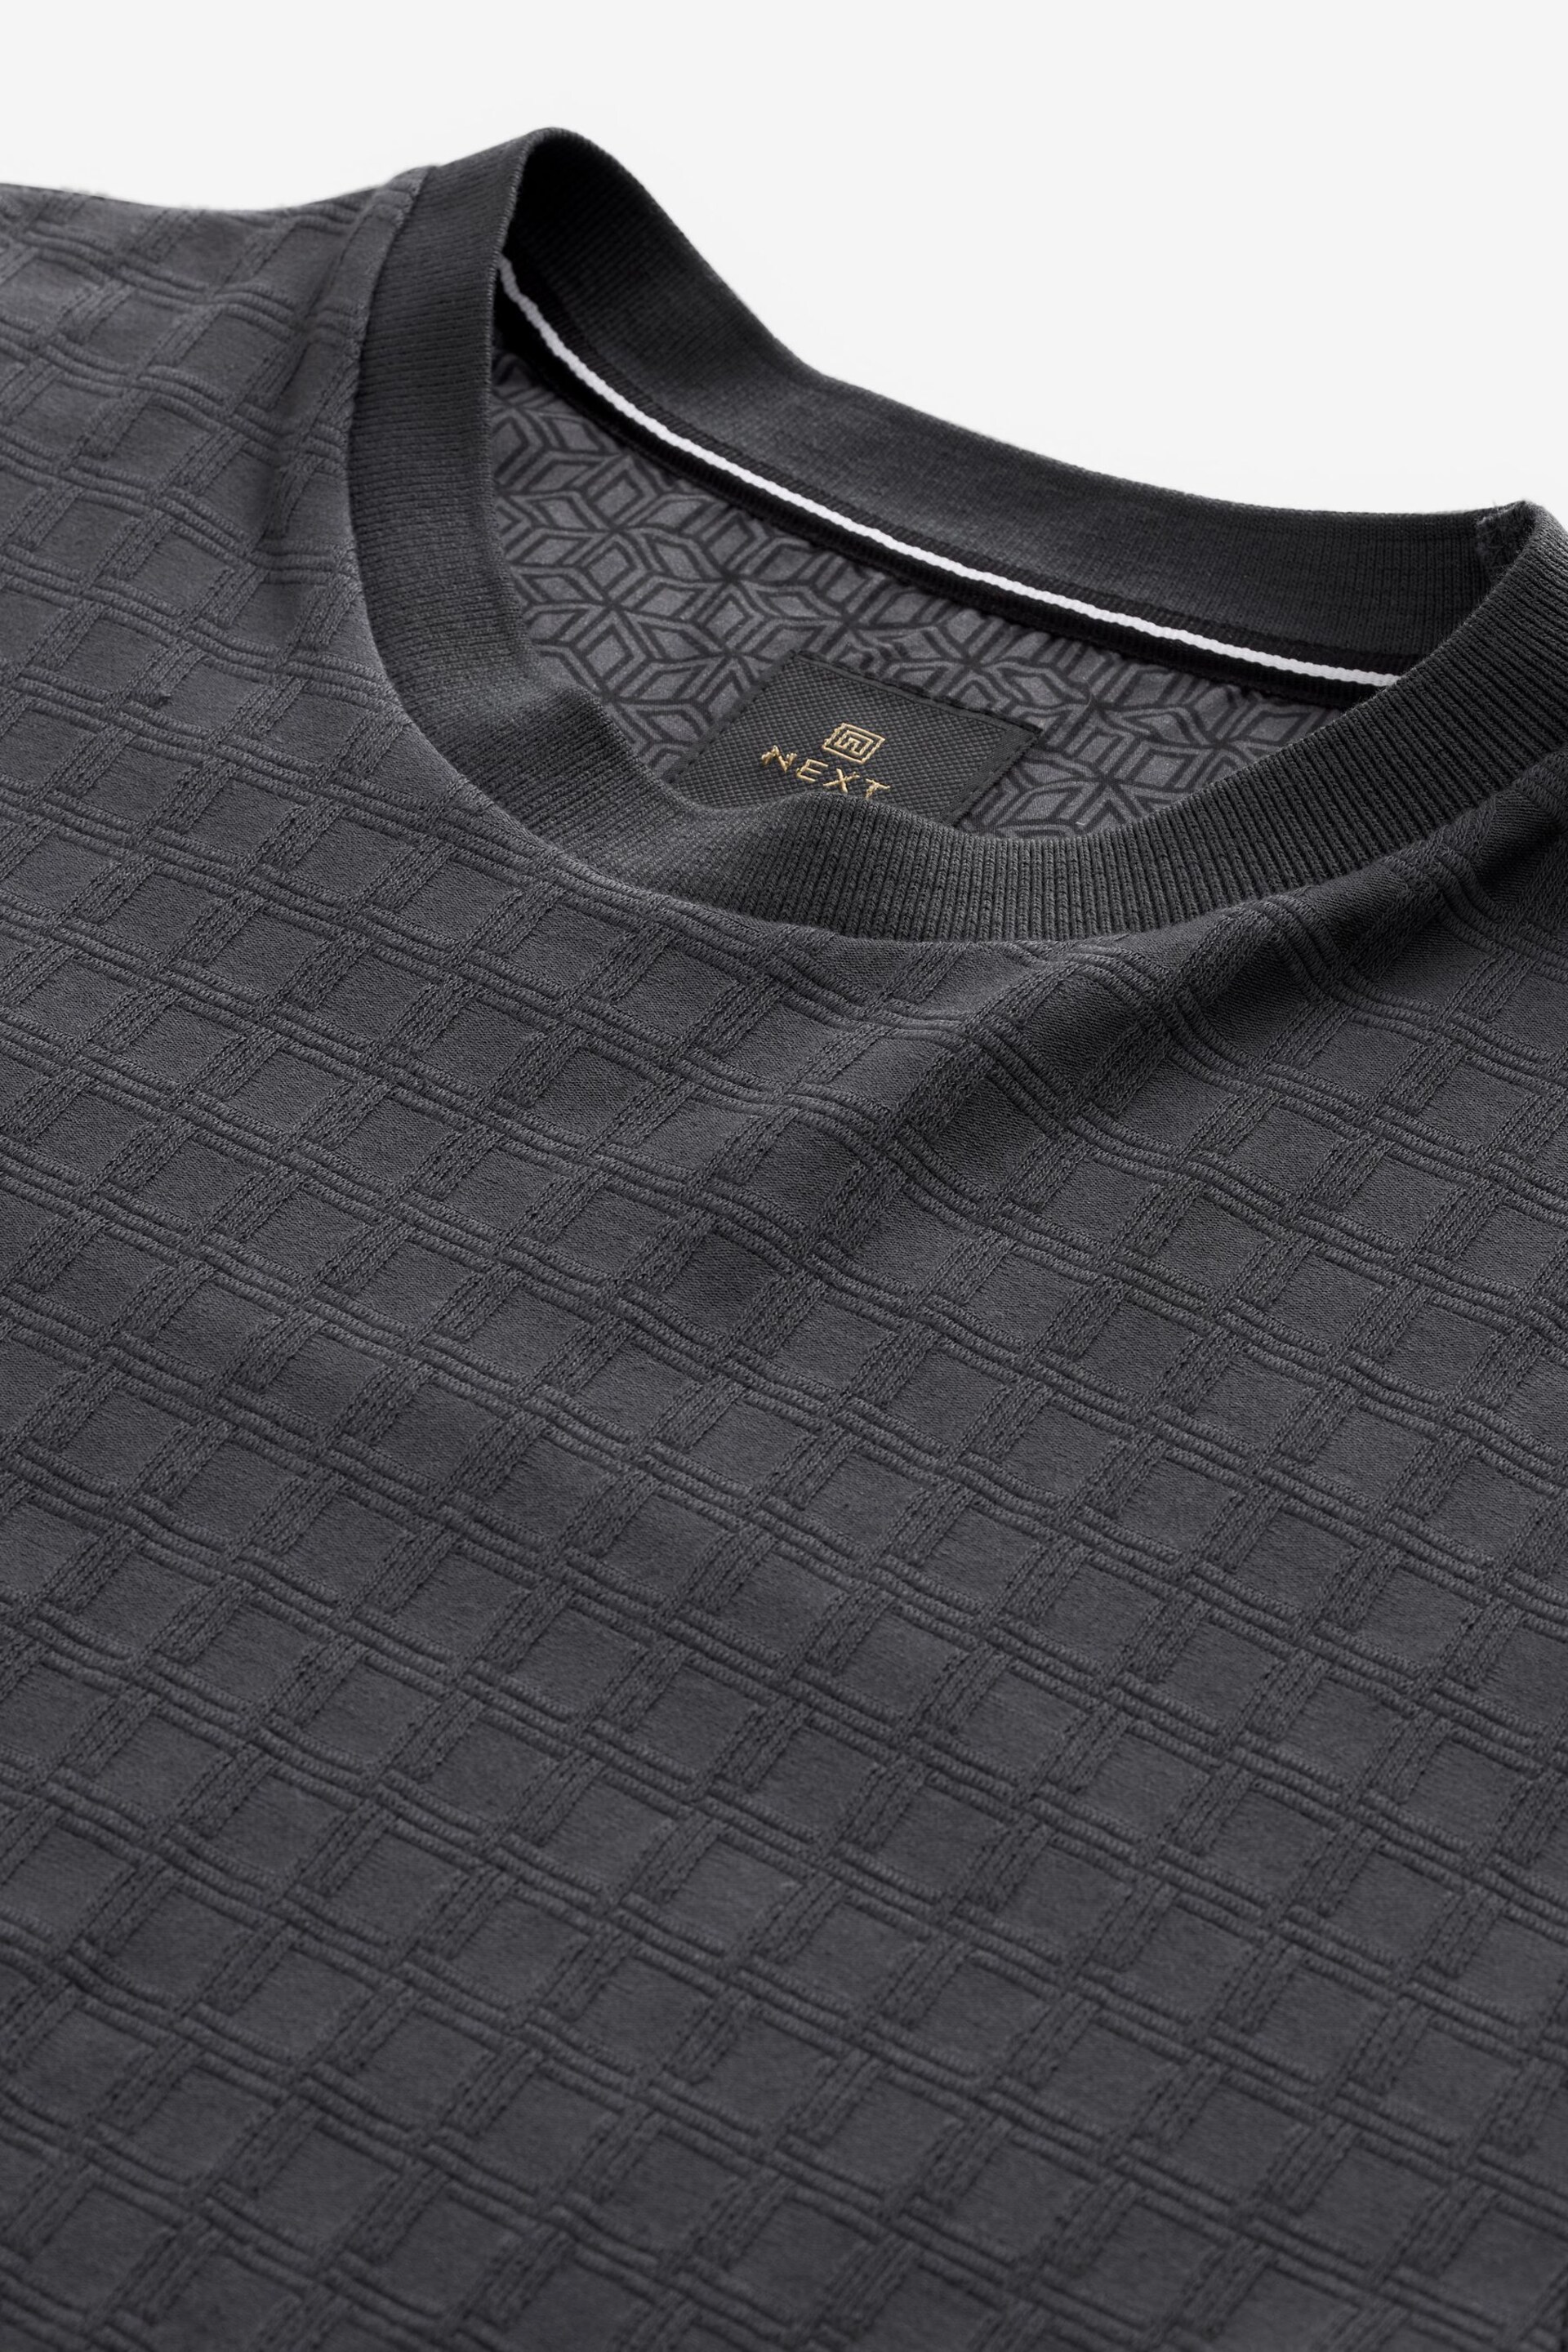 Charcoal Grey Texture T-Shirt - Image 7 of 8